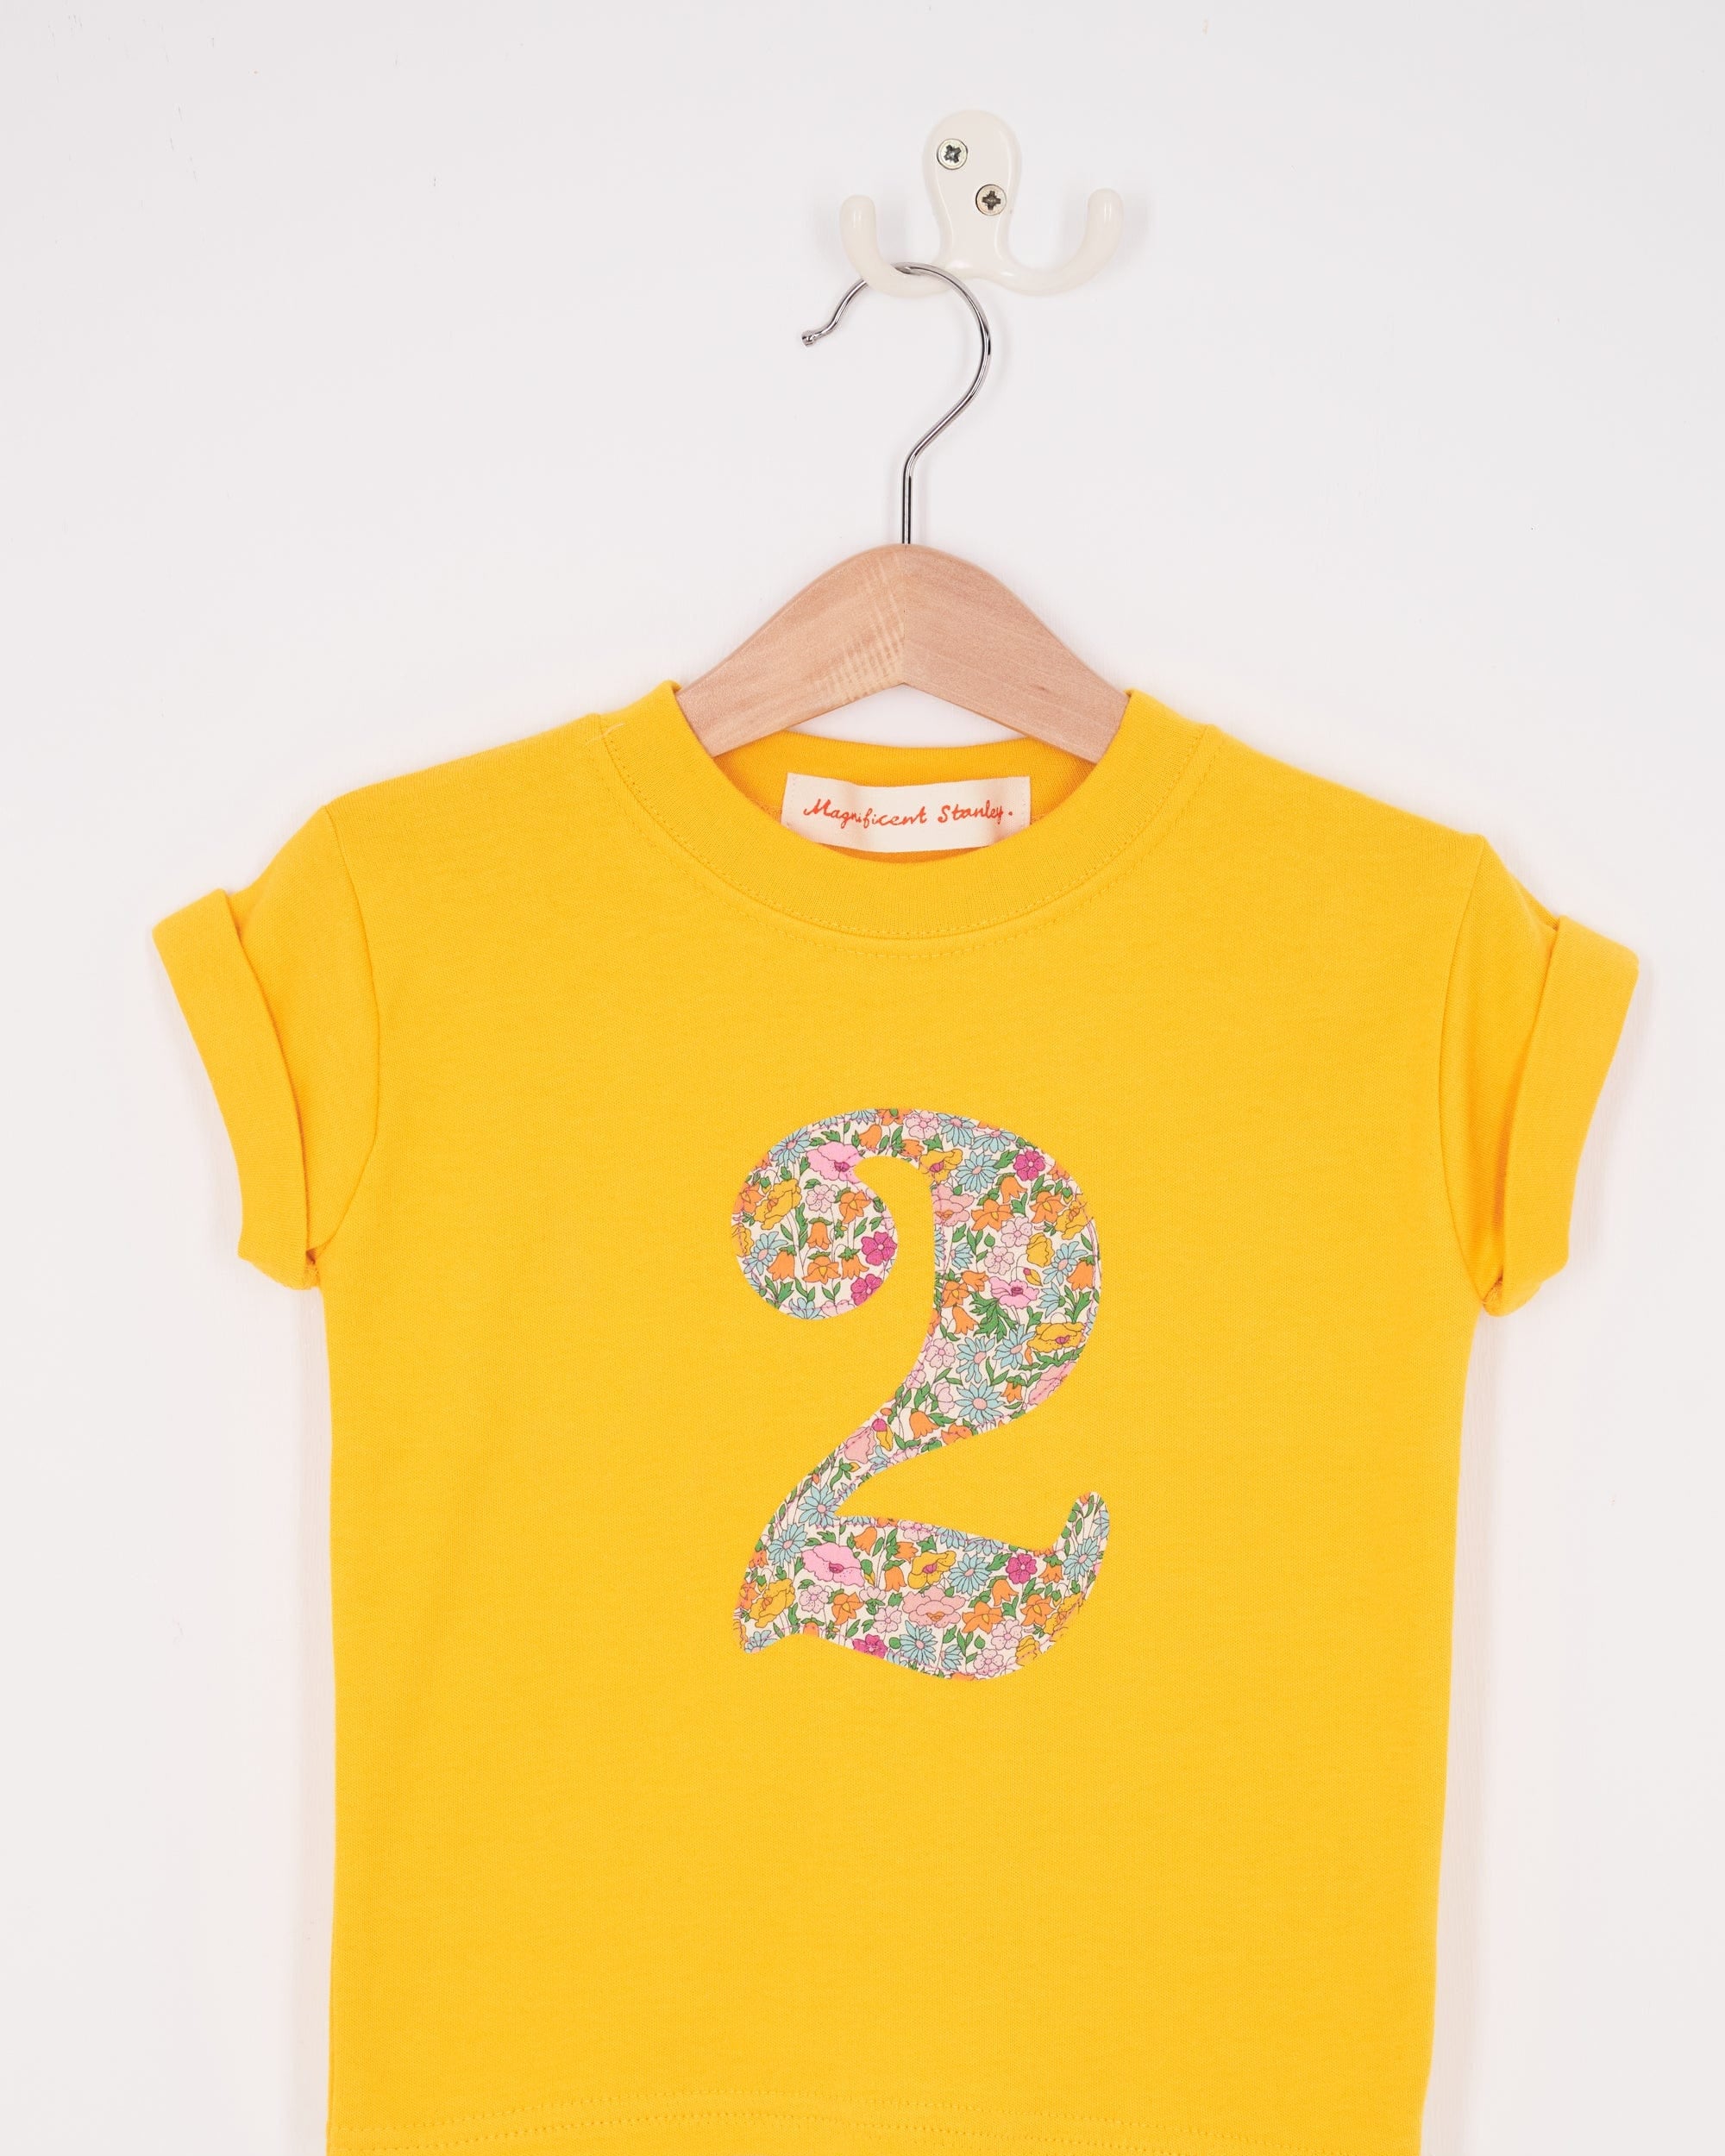 Magnificent Stanley Tee Number Yellow T-Shirt in Poppy Forest Liberty Print